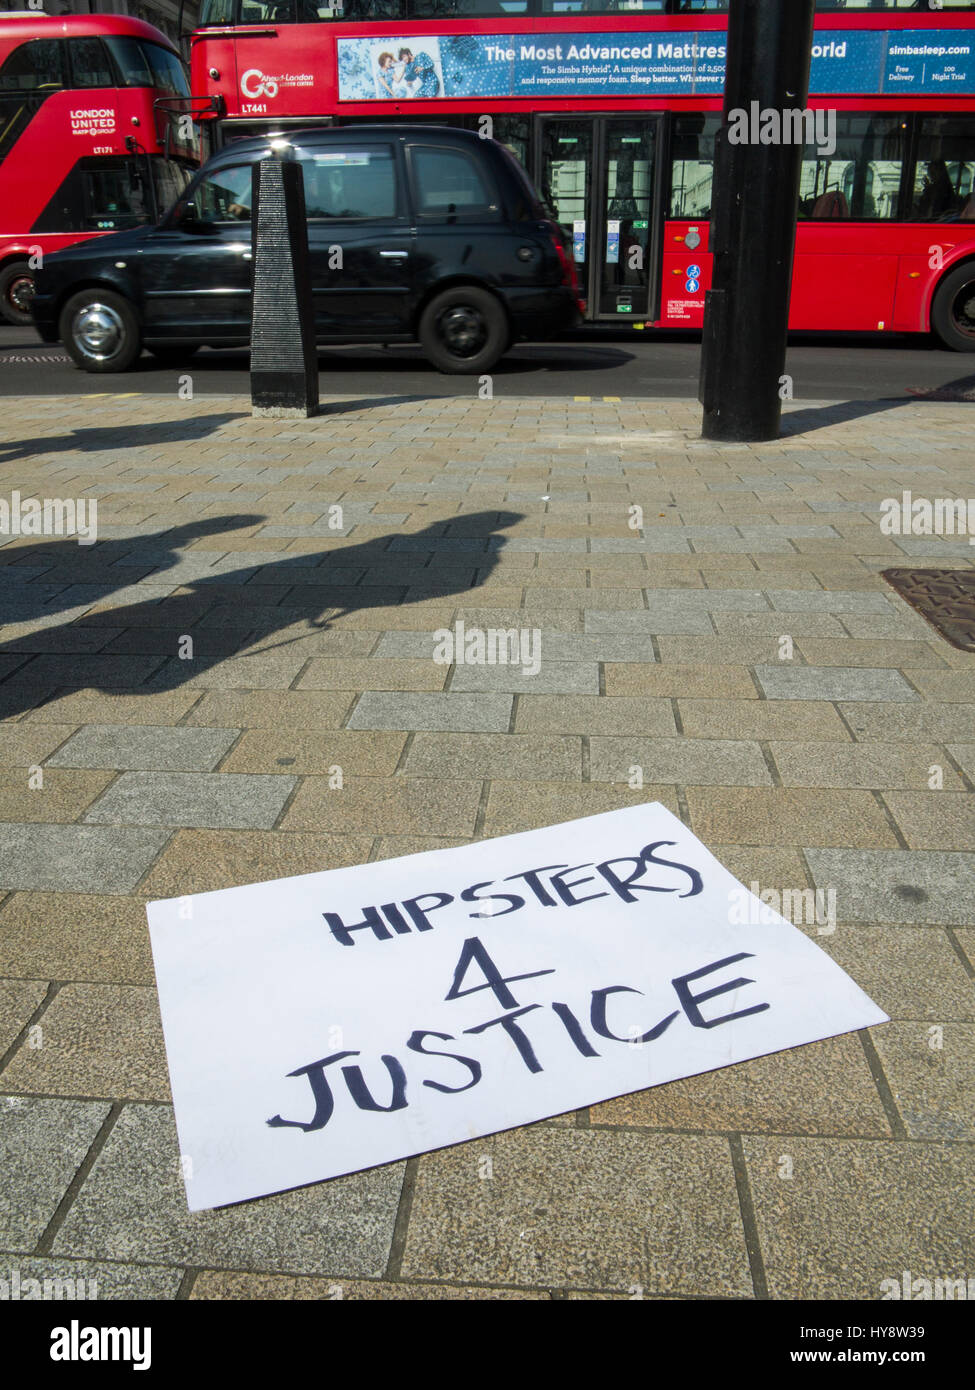 Hipsters for Justice in Central London Stock Photo